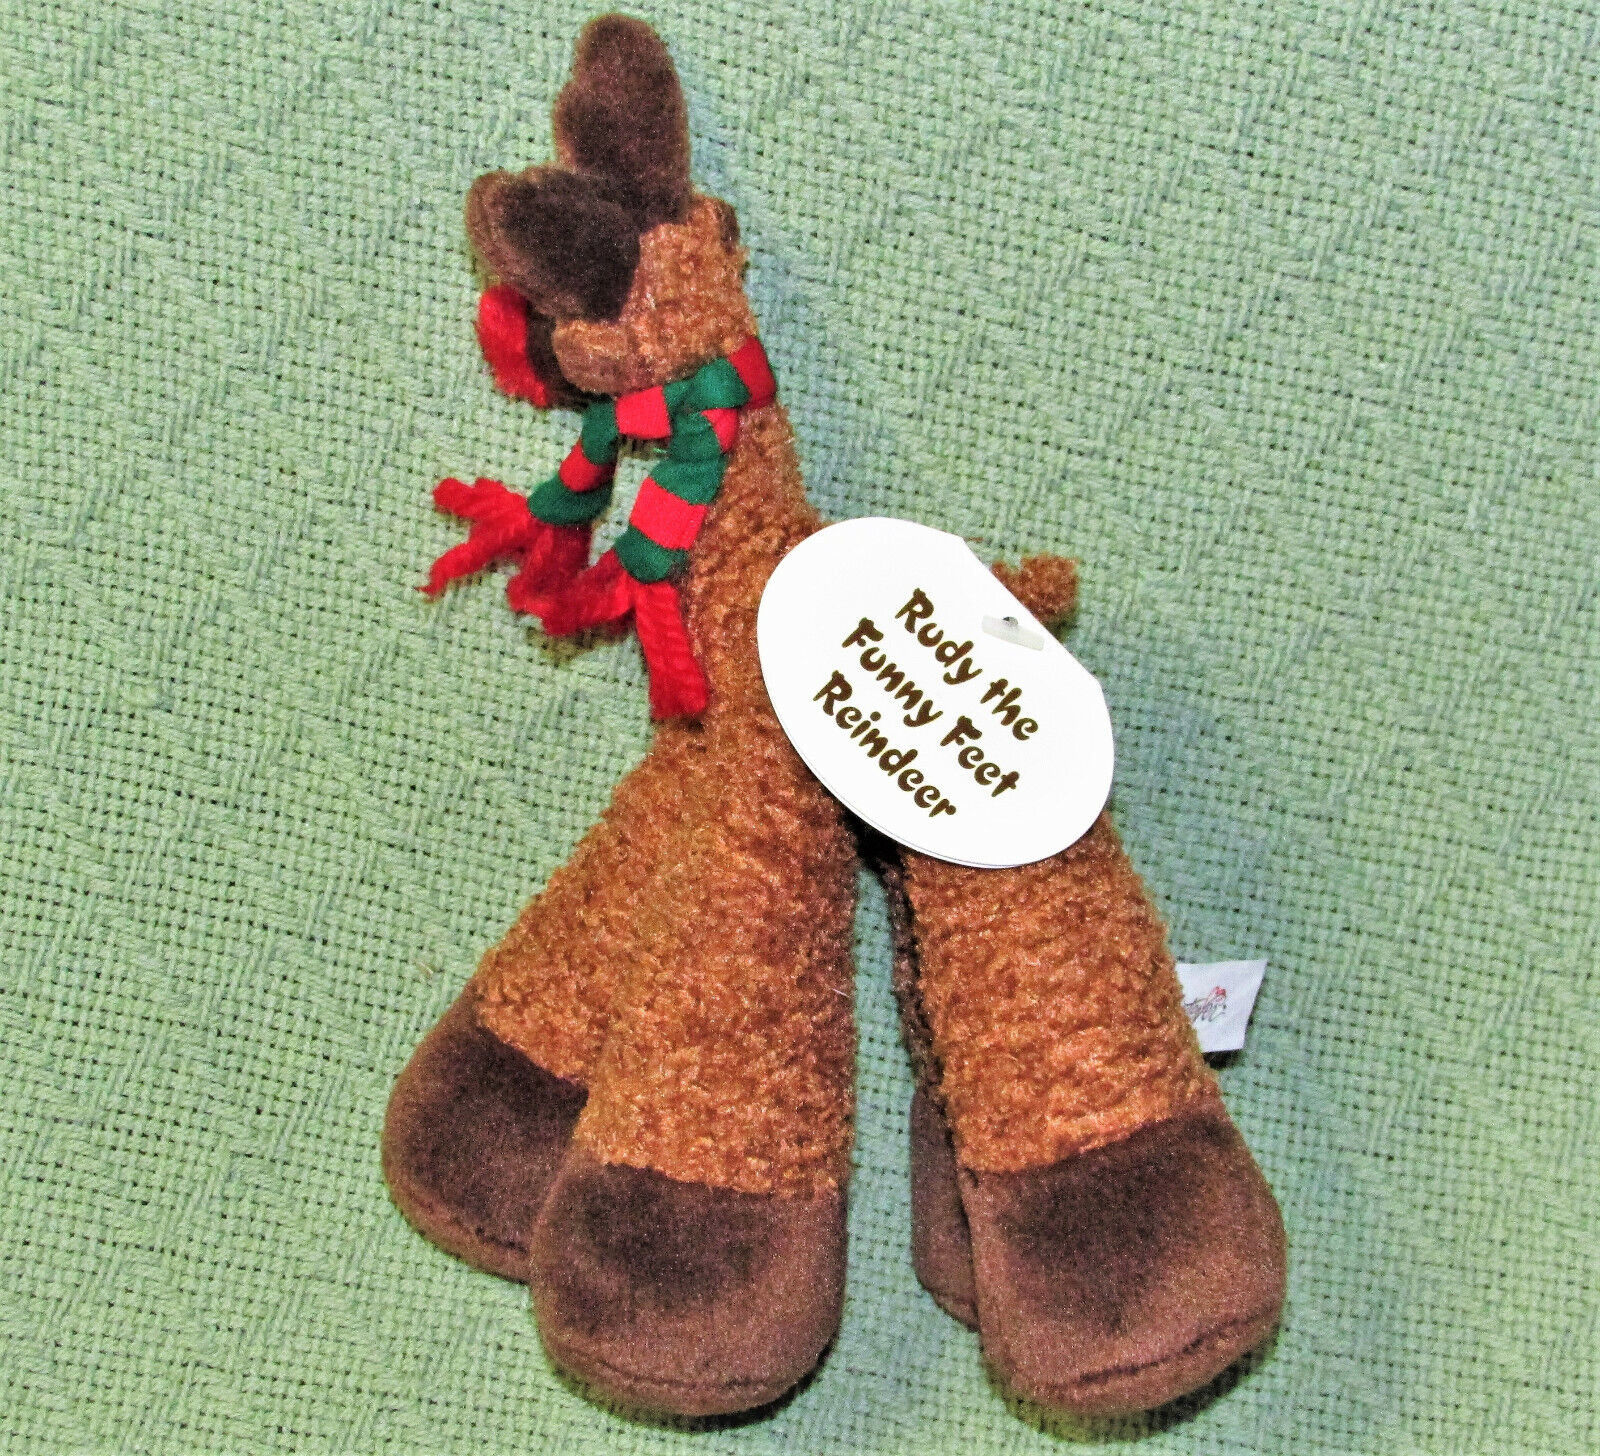 8" FUNNY FEET RUDY REINDEER BESTEVER STUFFED ANIMAL RED NOSE SCARF HANG TAG TOY - £7.57 GBP